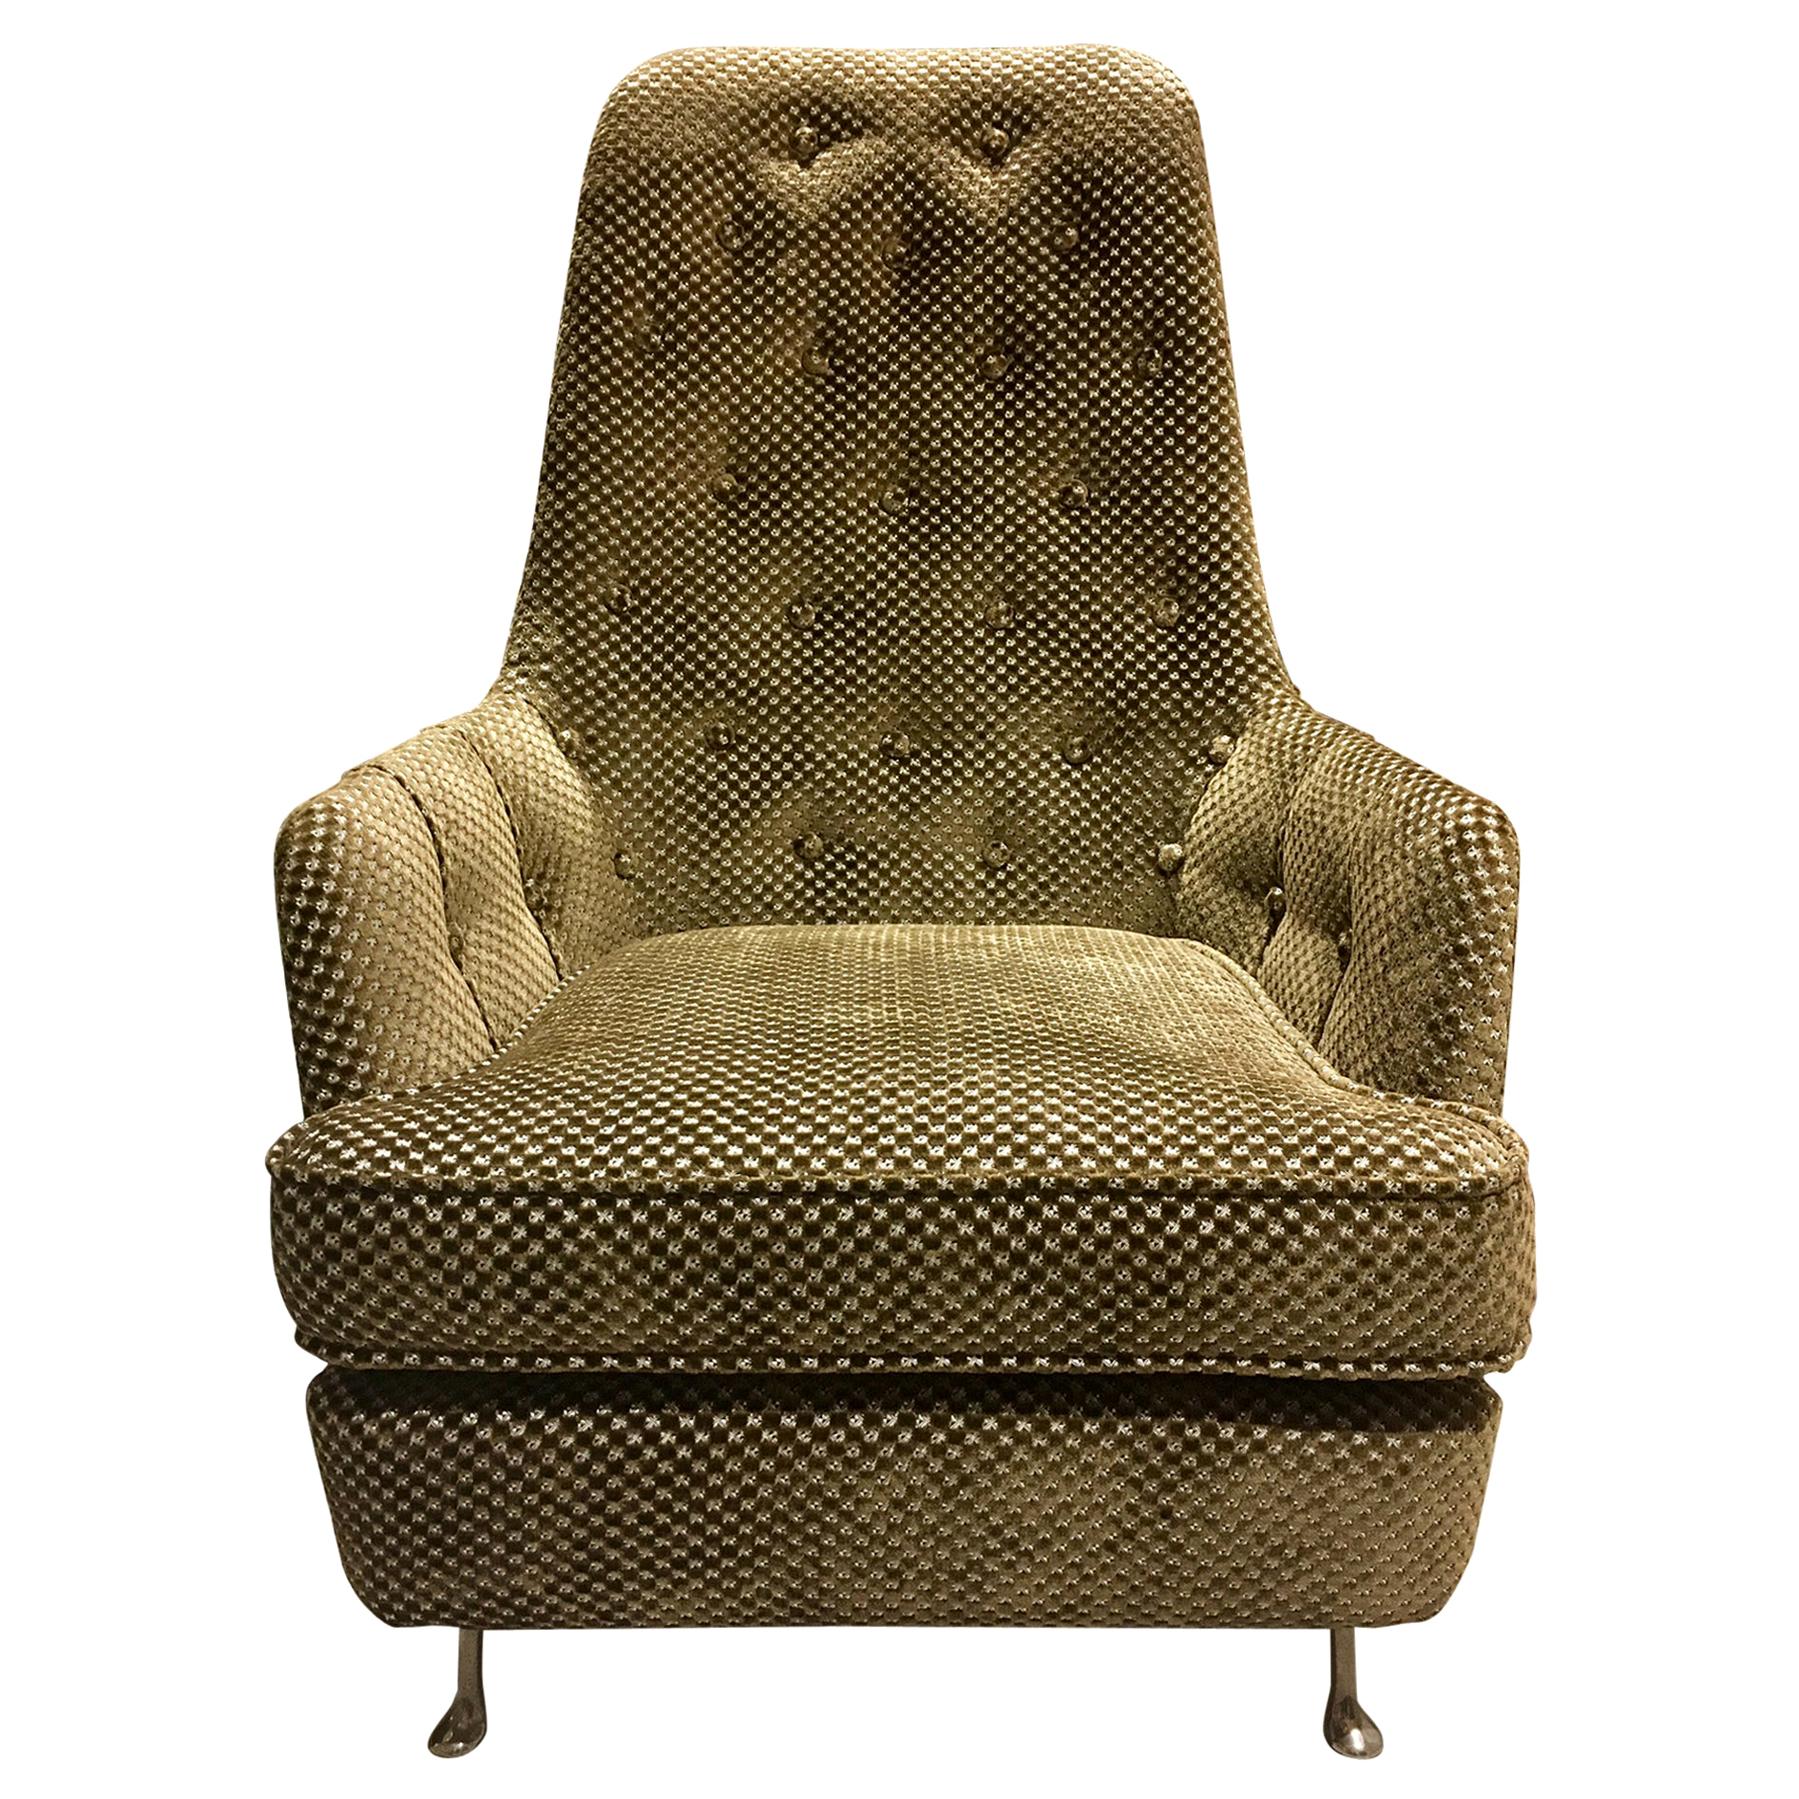 1950s Button-Tufted Armchair with Metal Feet